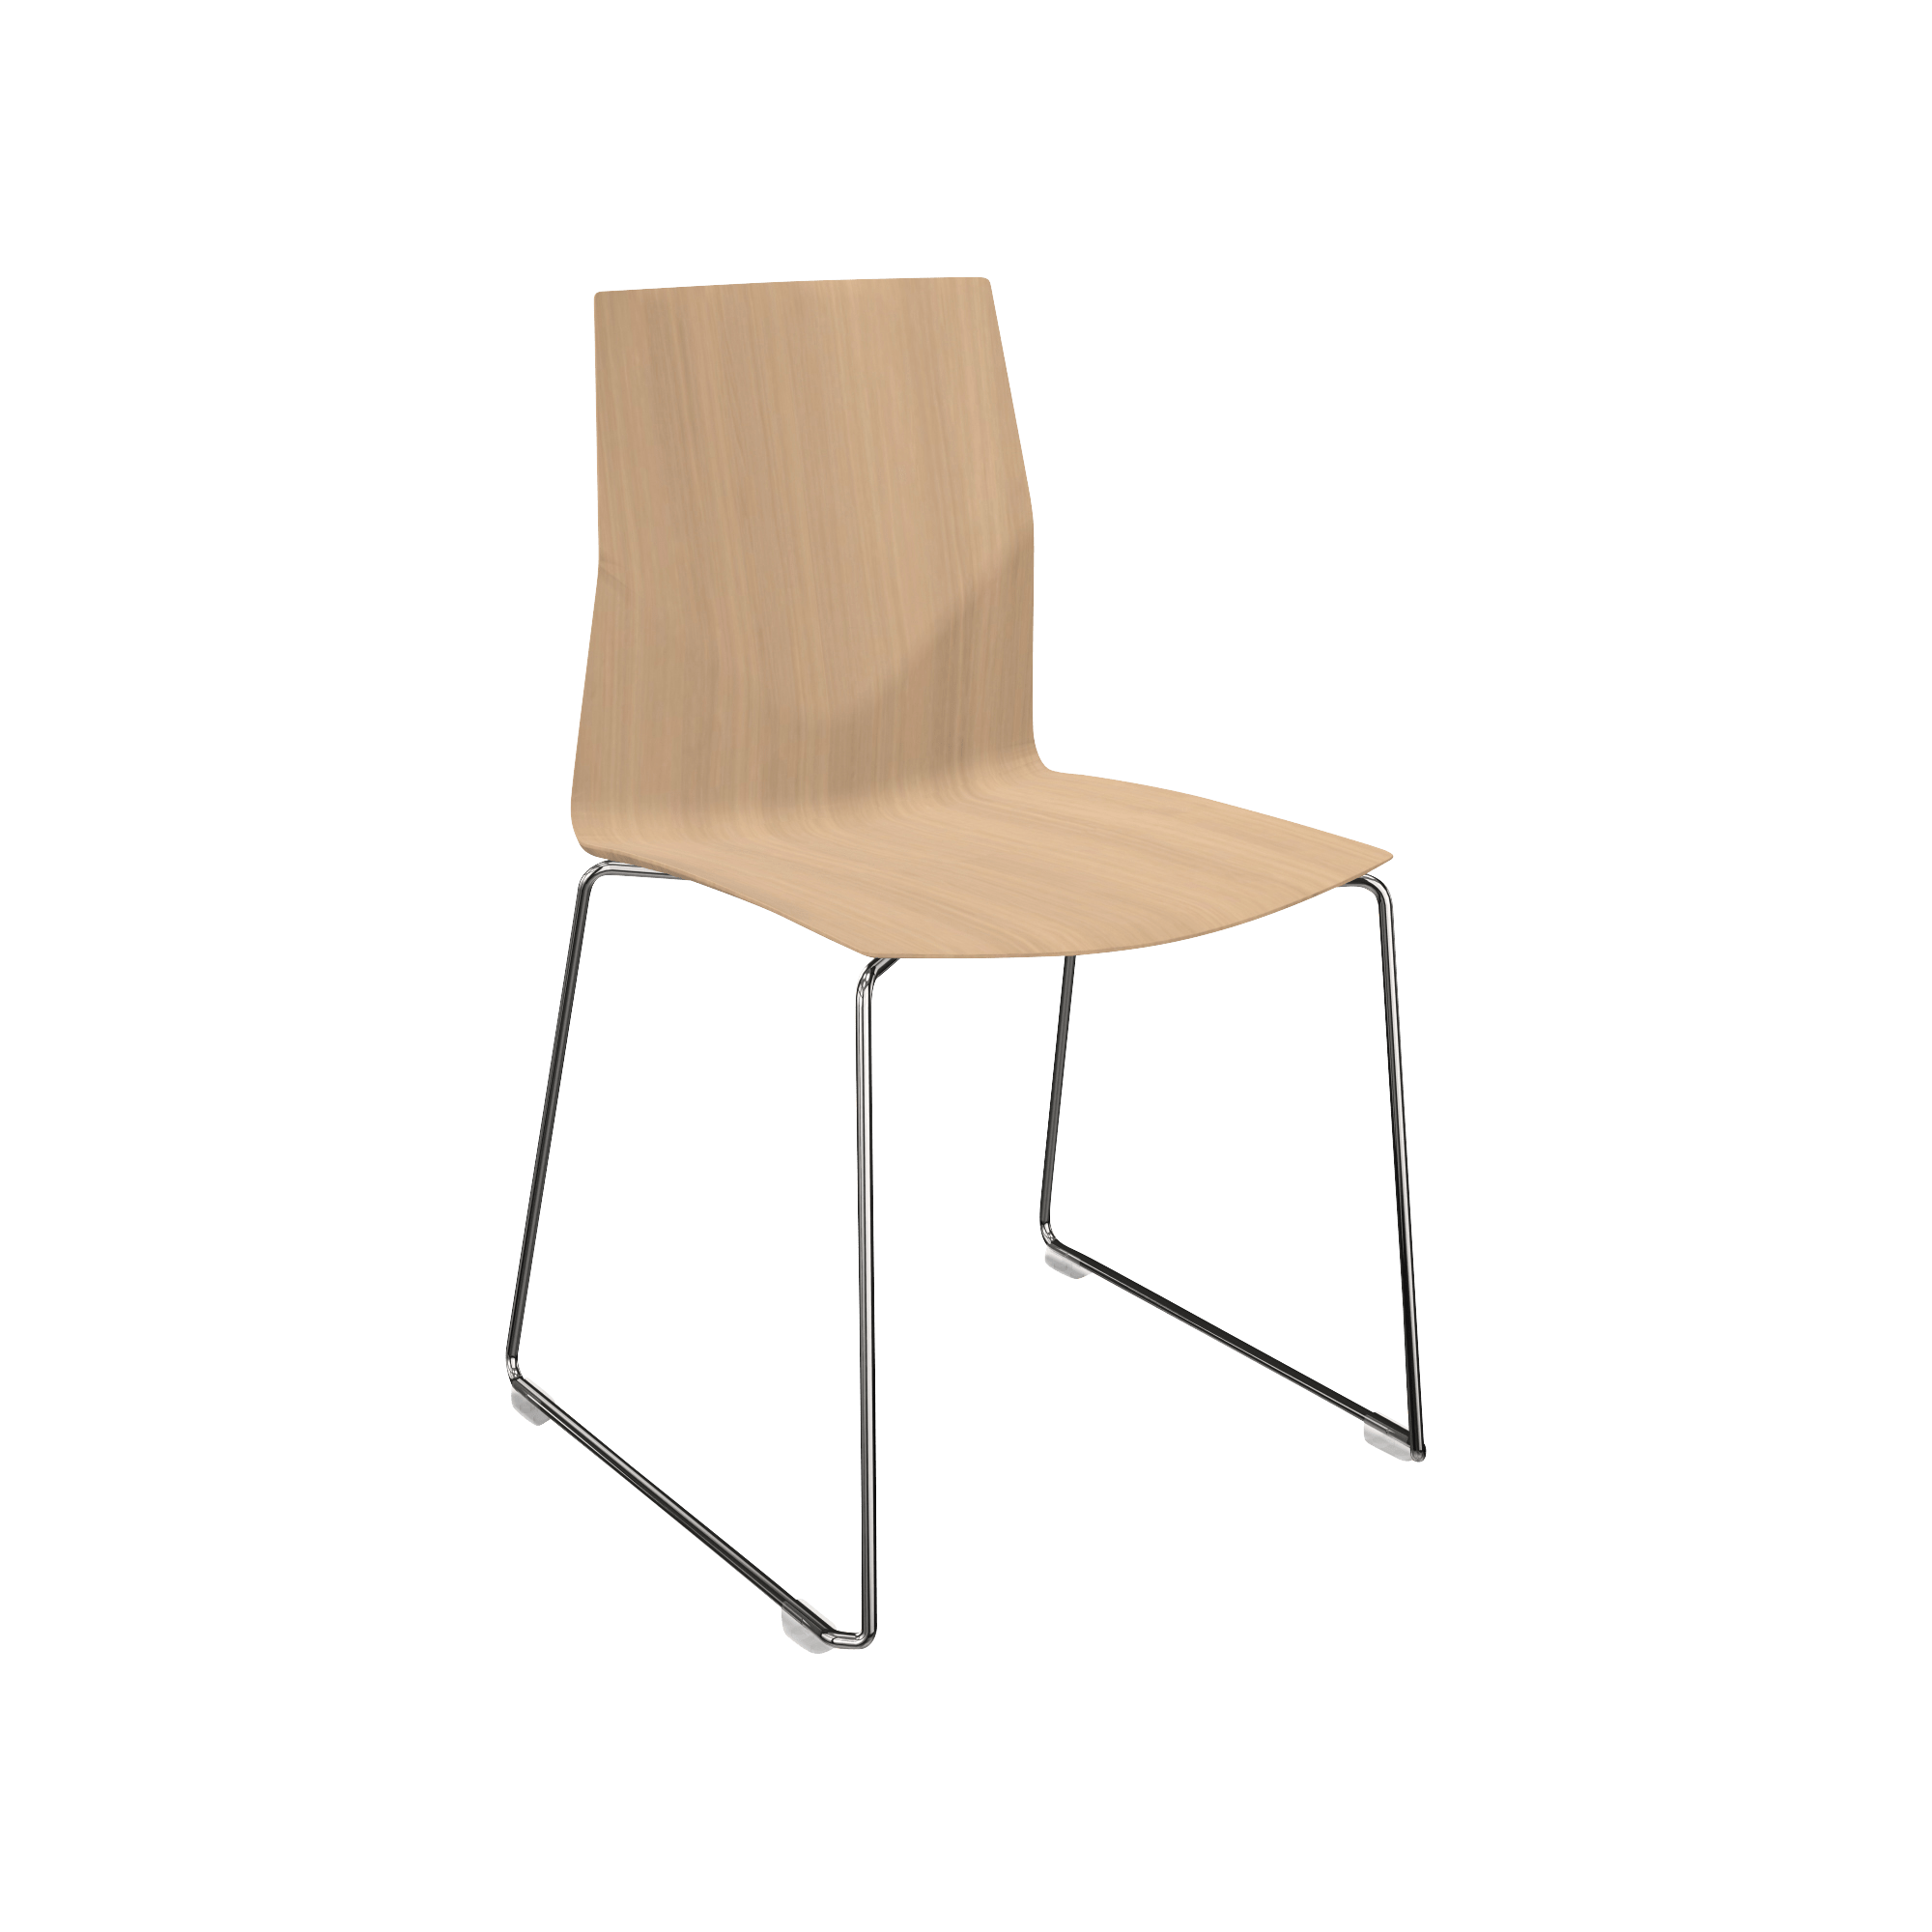 wooden chair with metal legs